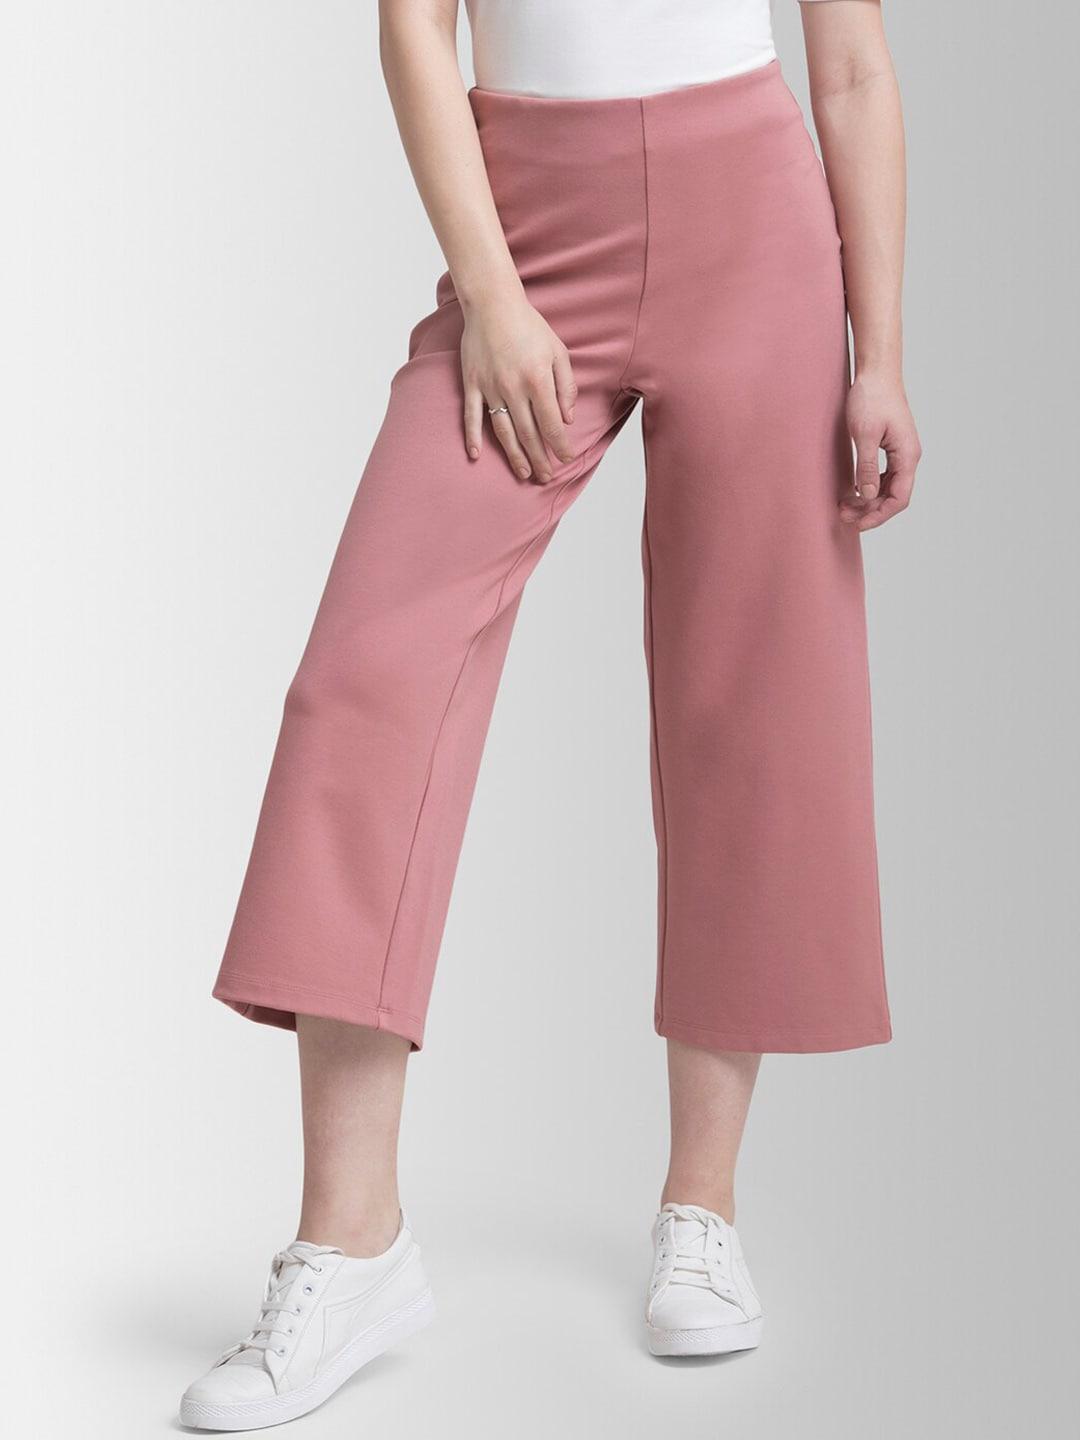 fablestreet women pink loose fit solid culottes